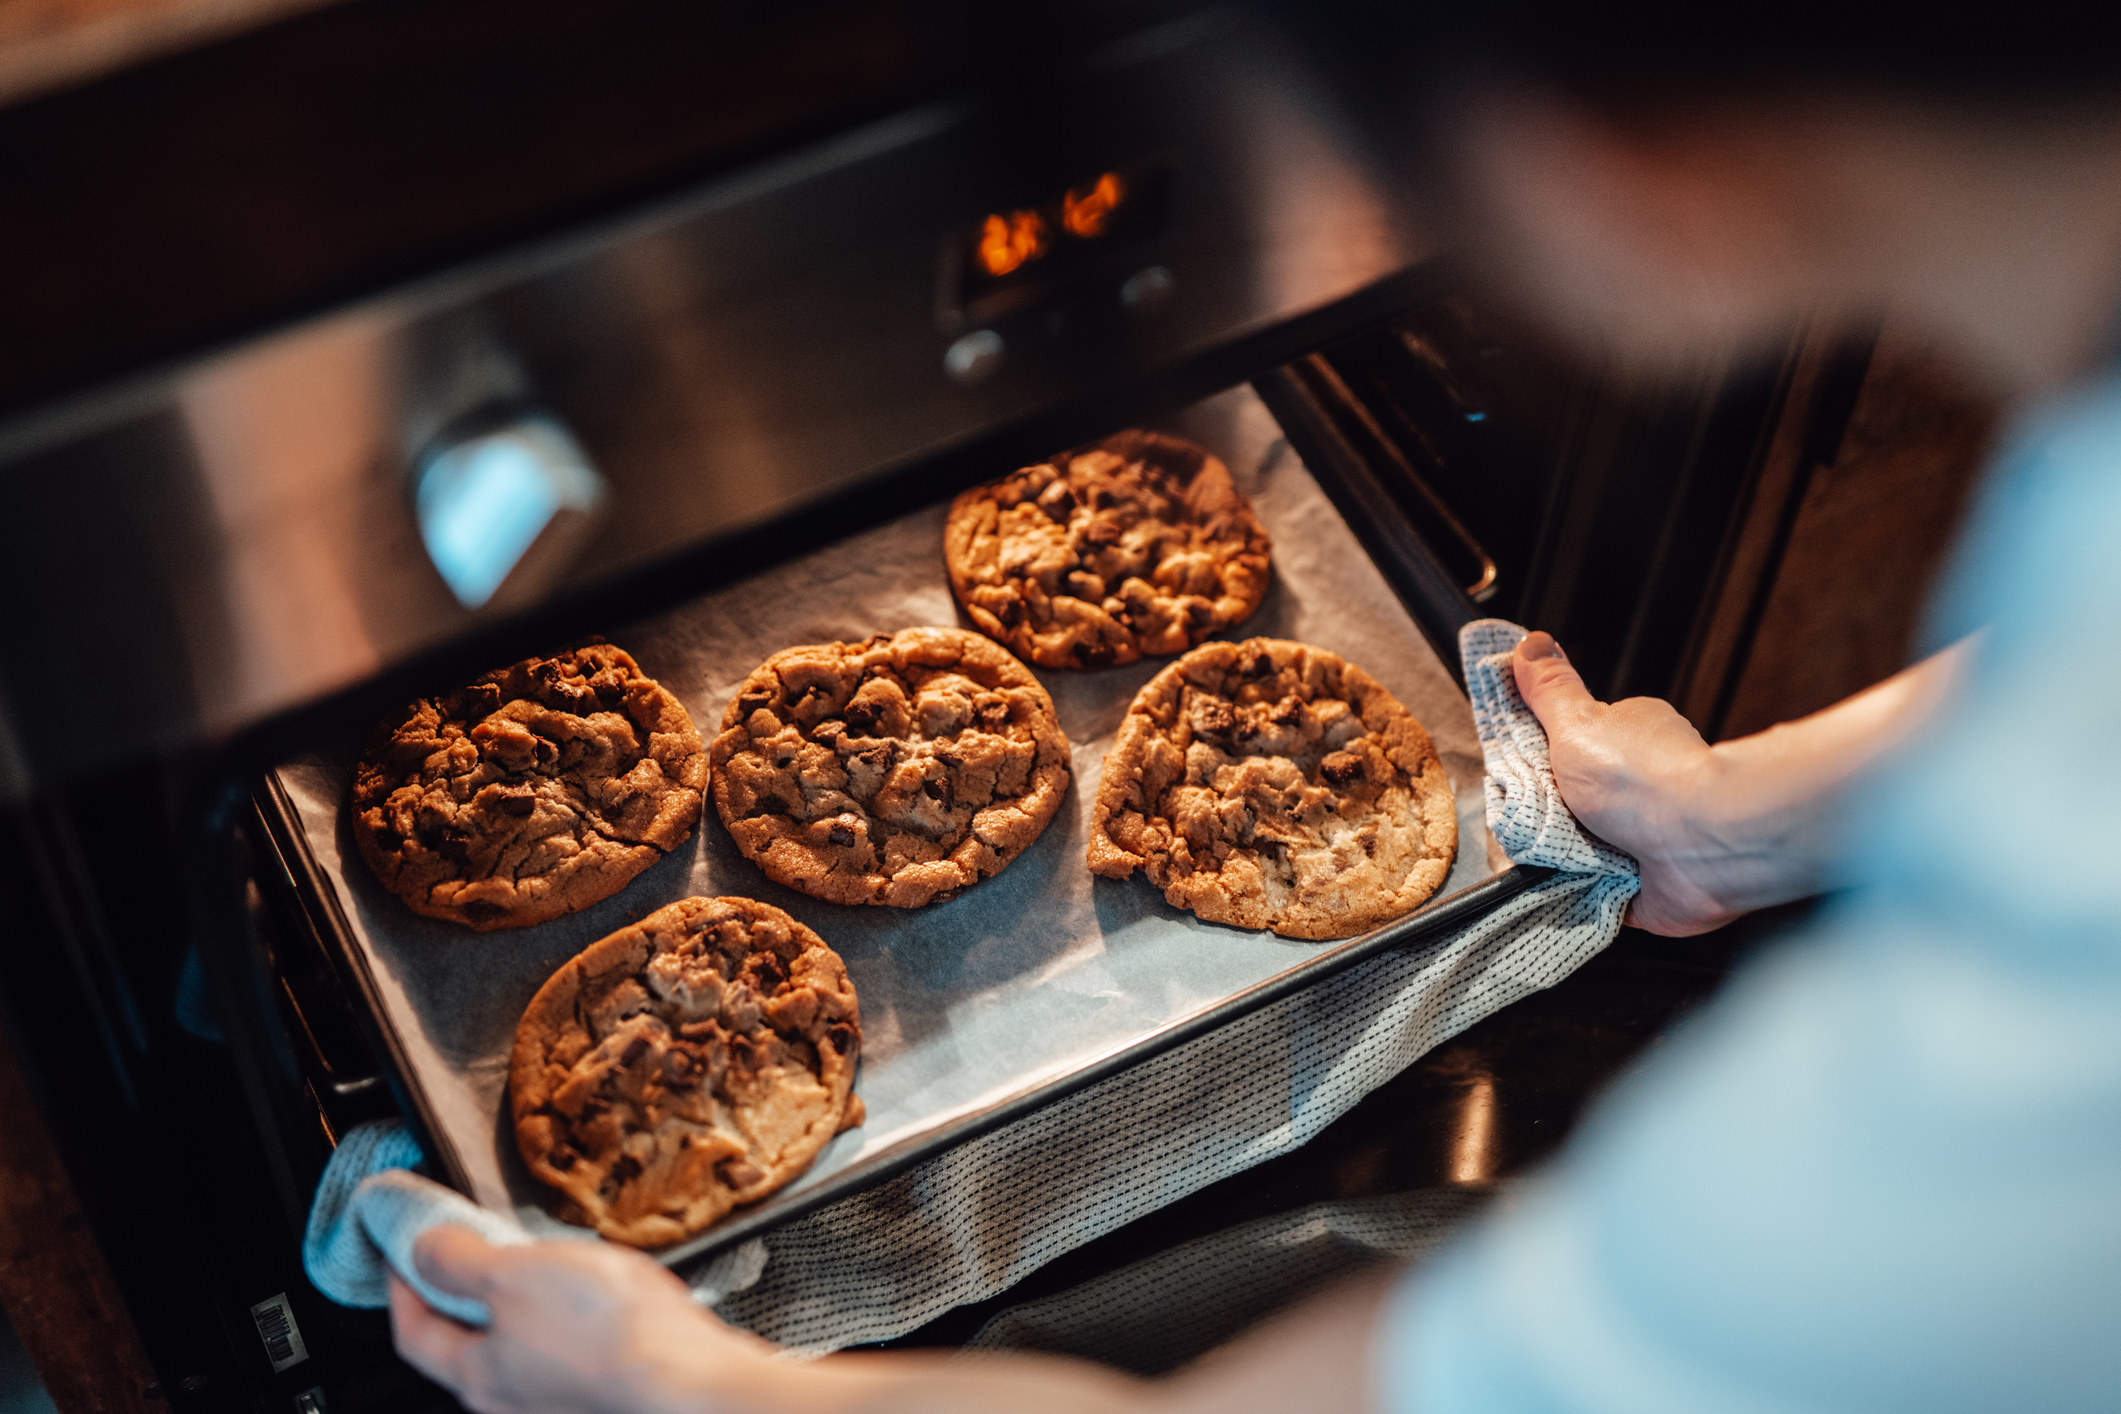 A woman taking out freshly baked cookies from the oven